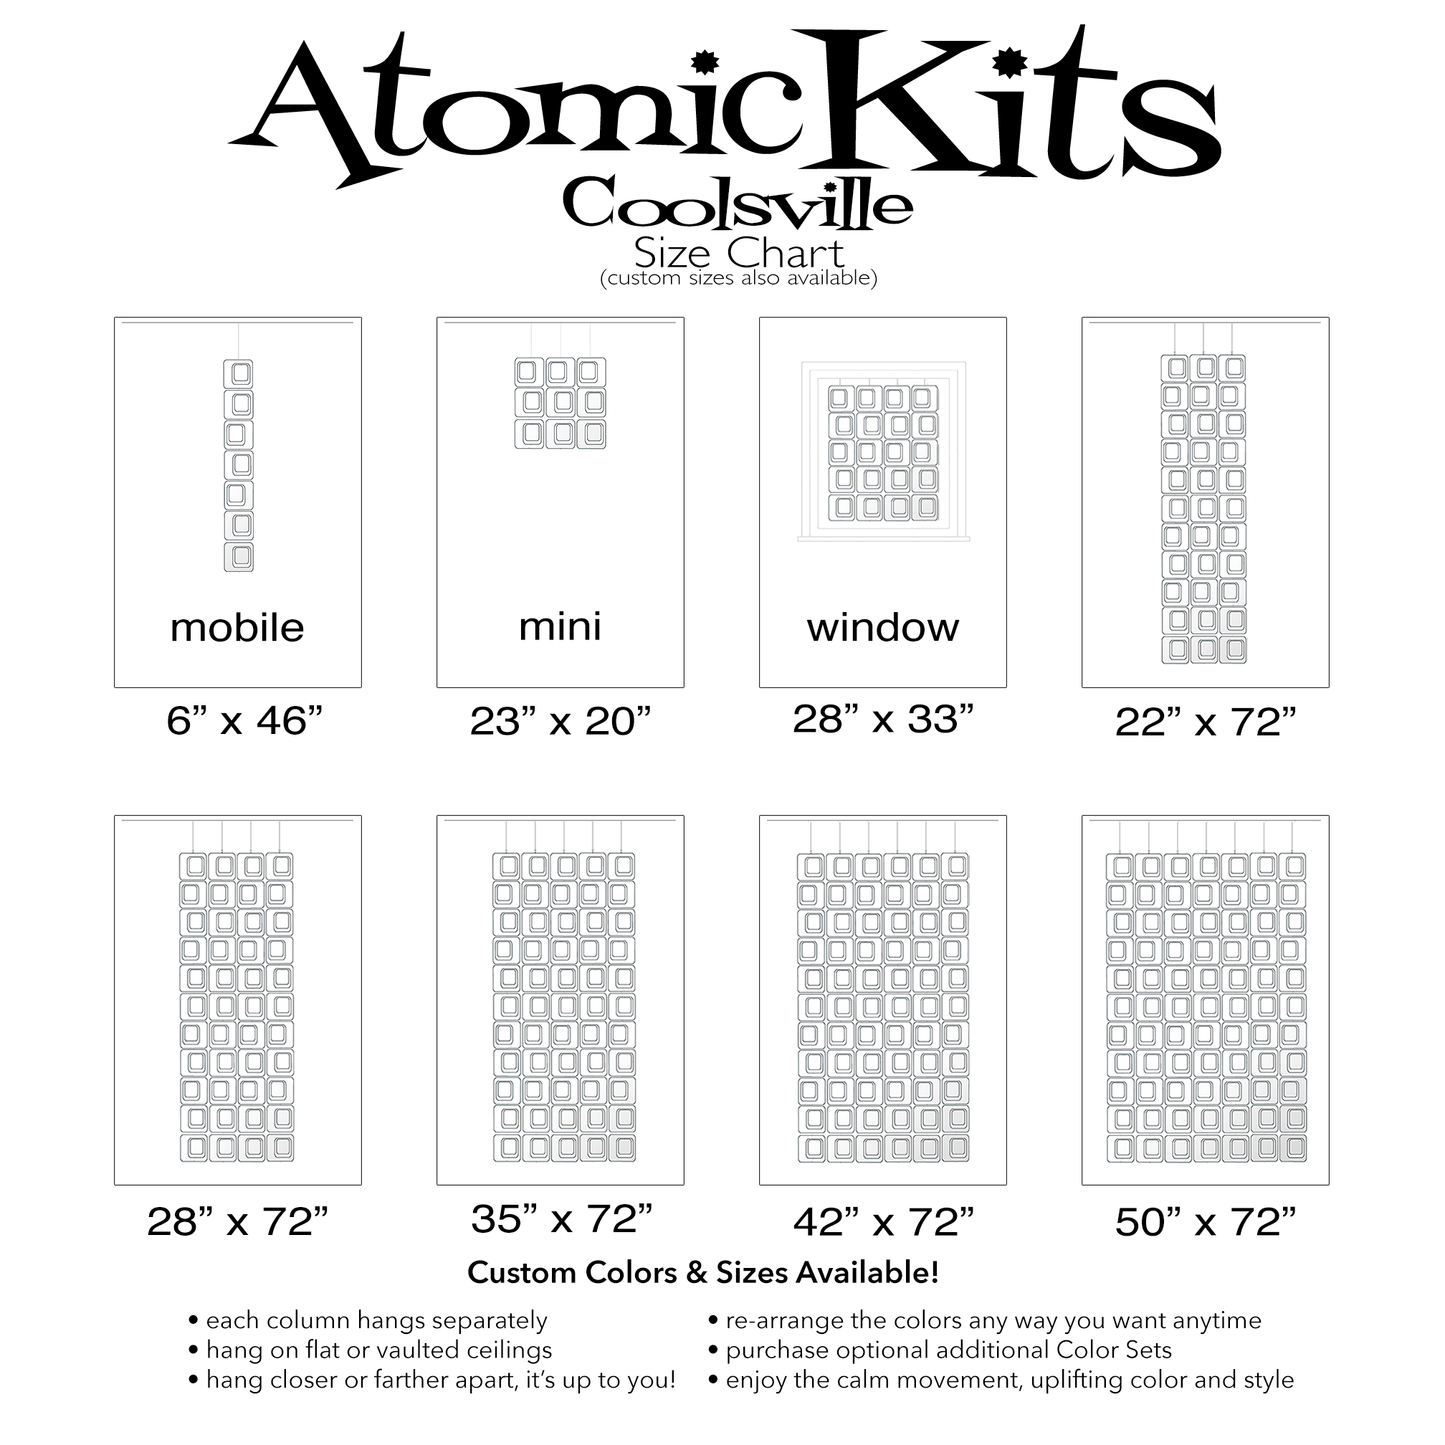 Size Chart for Coolsville DIY KIT for mobiles, room dividers, and curtains  in Clear Lucite Acrylic by AtomicMobiles.com